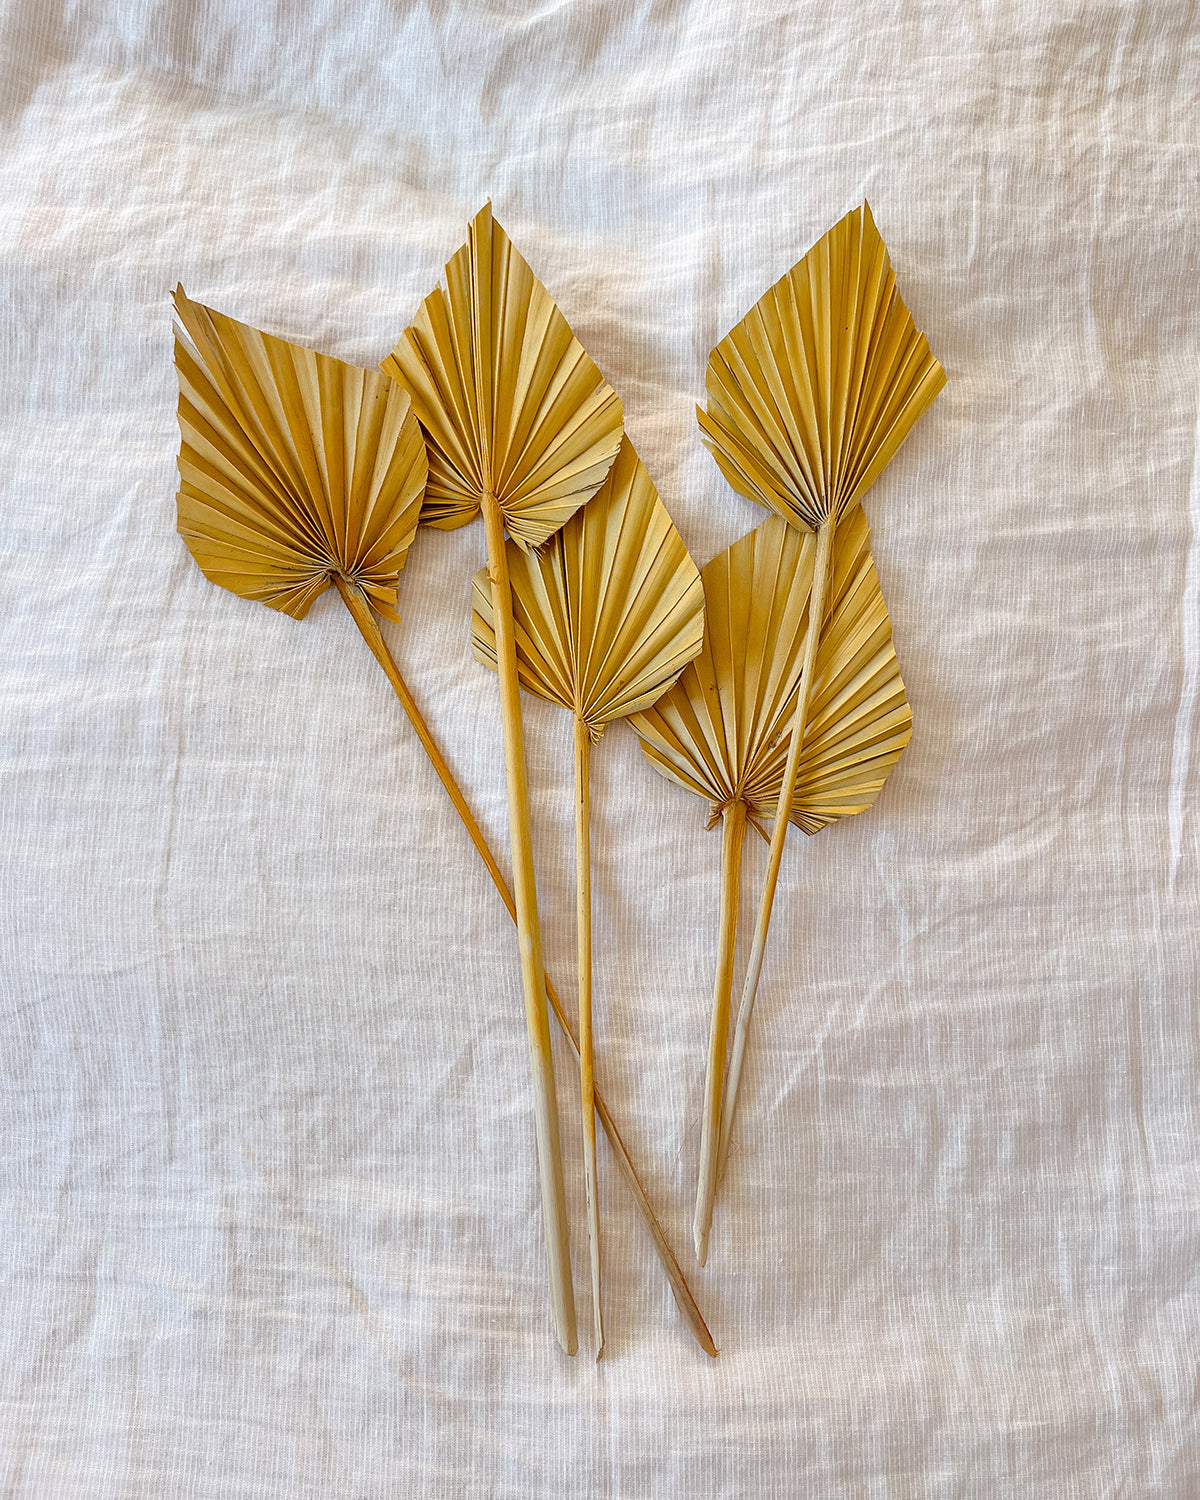 Mustard Yellow Dried Palm Spears